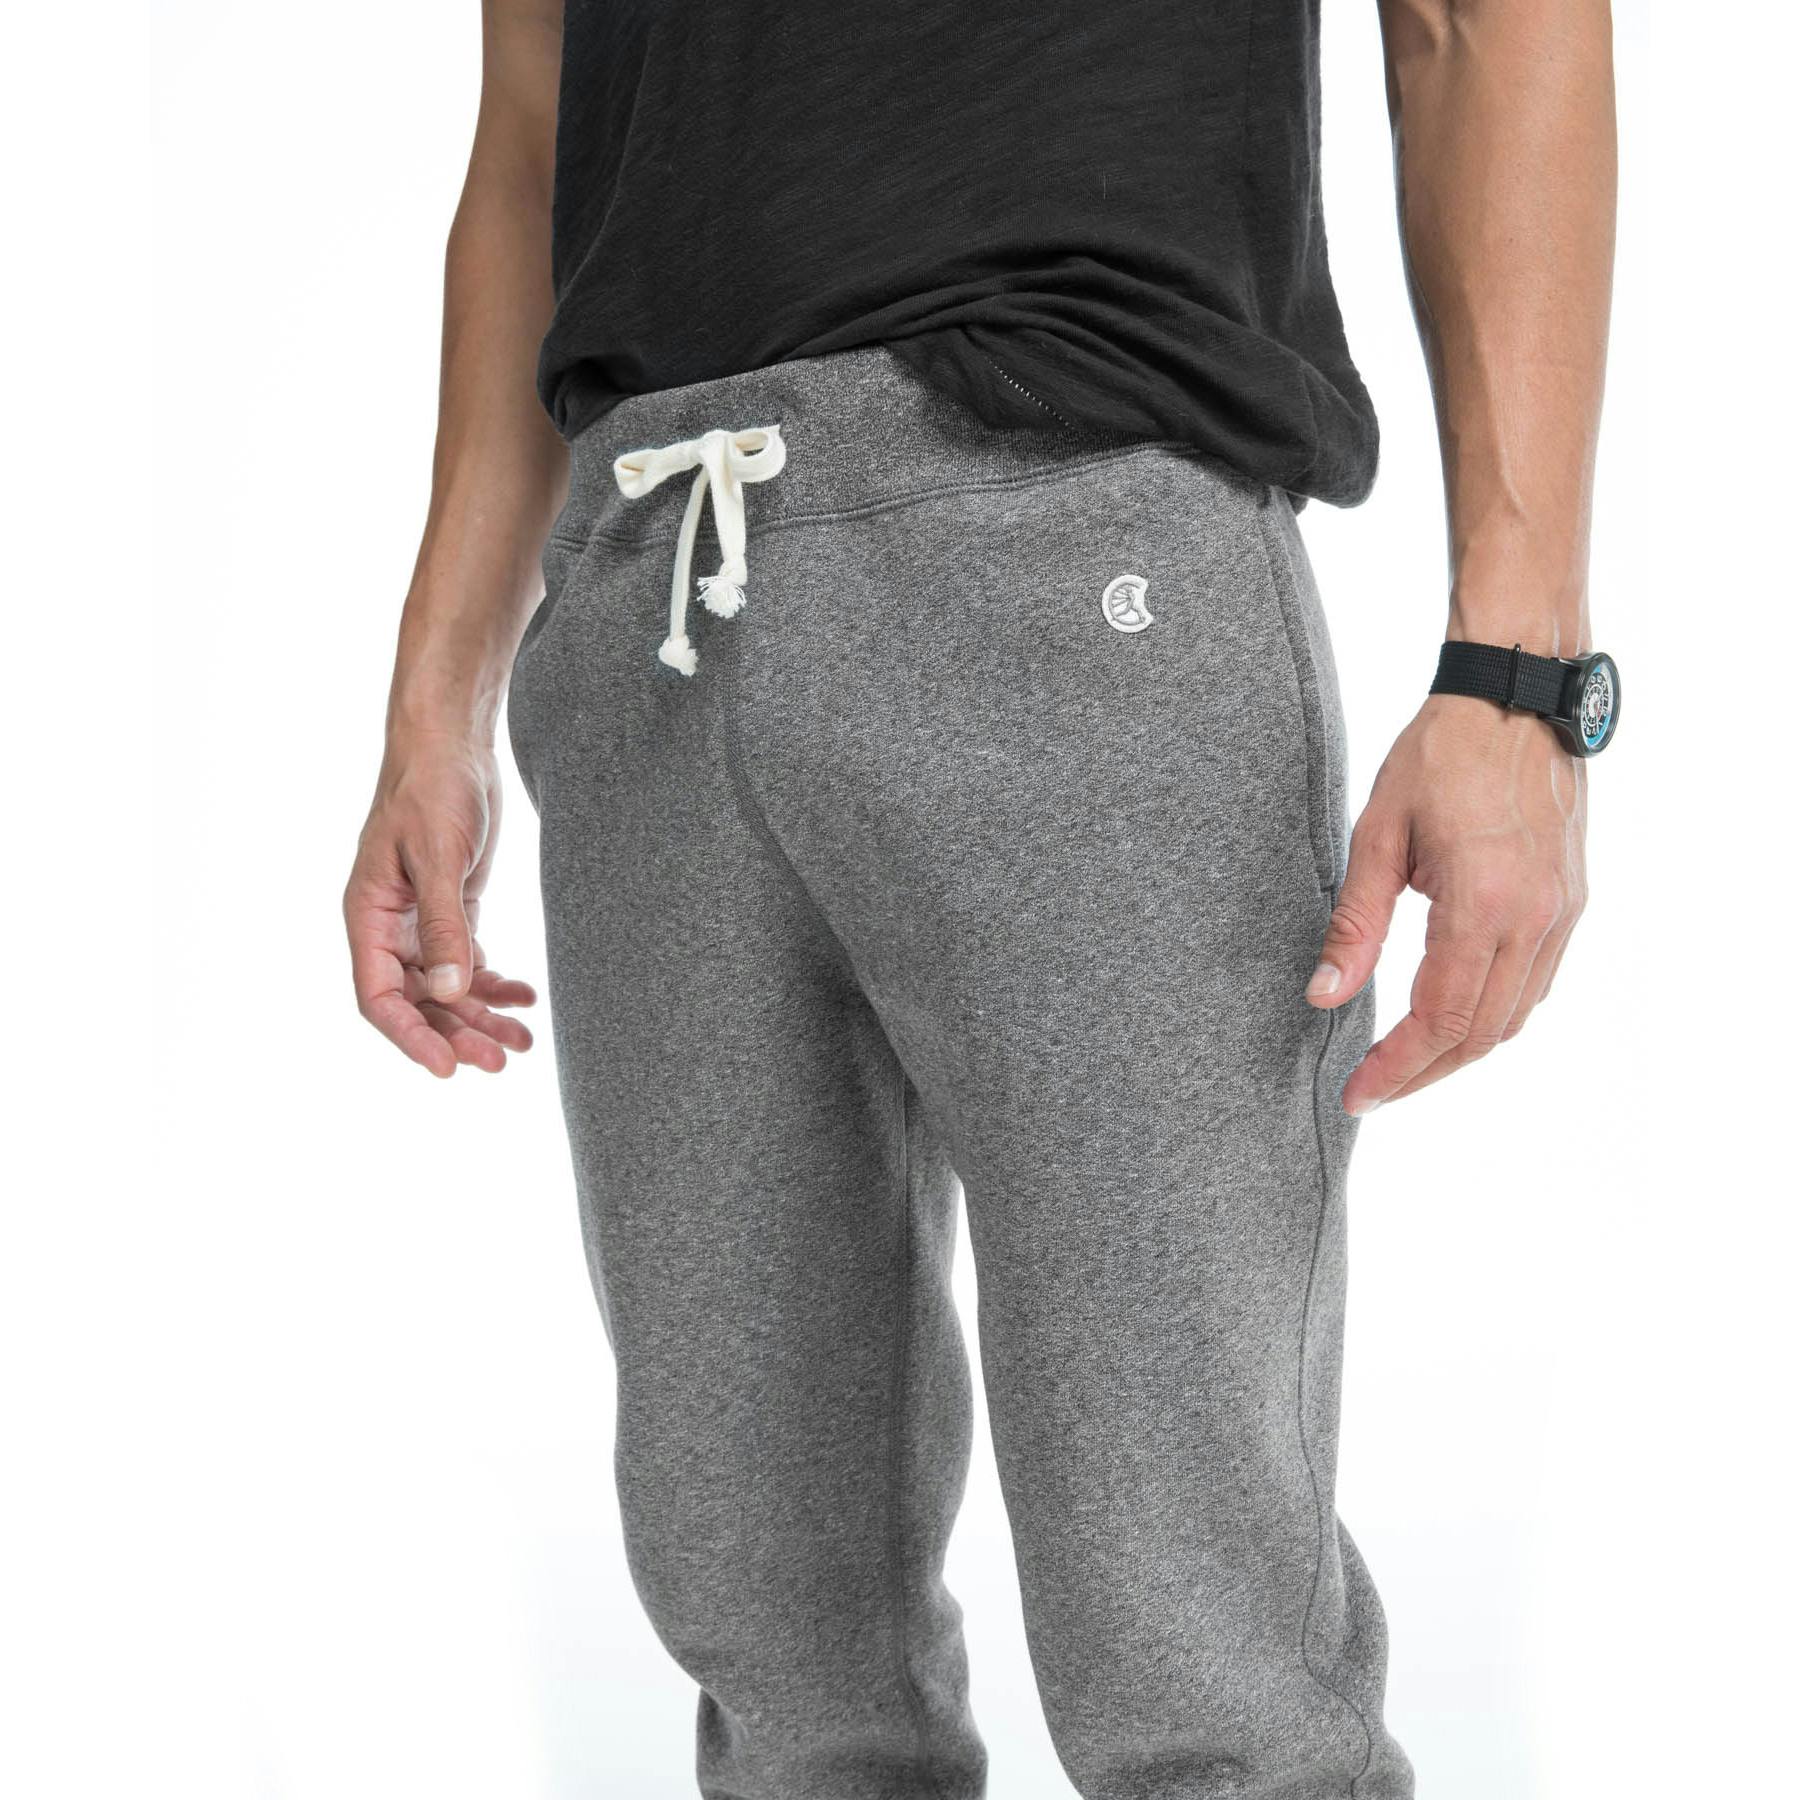 Size XL Todd Snyder x Champion Cuffed Sweatpants MSRP $160 Charcoal Heather 